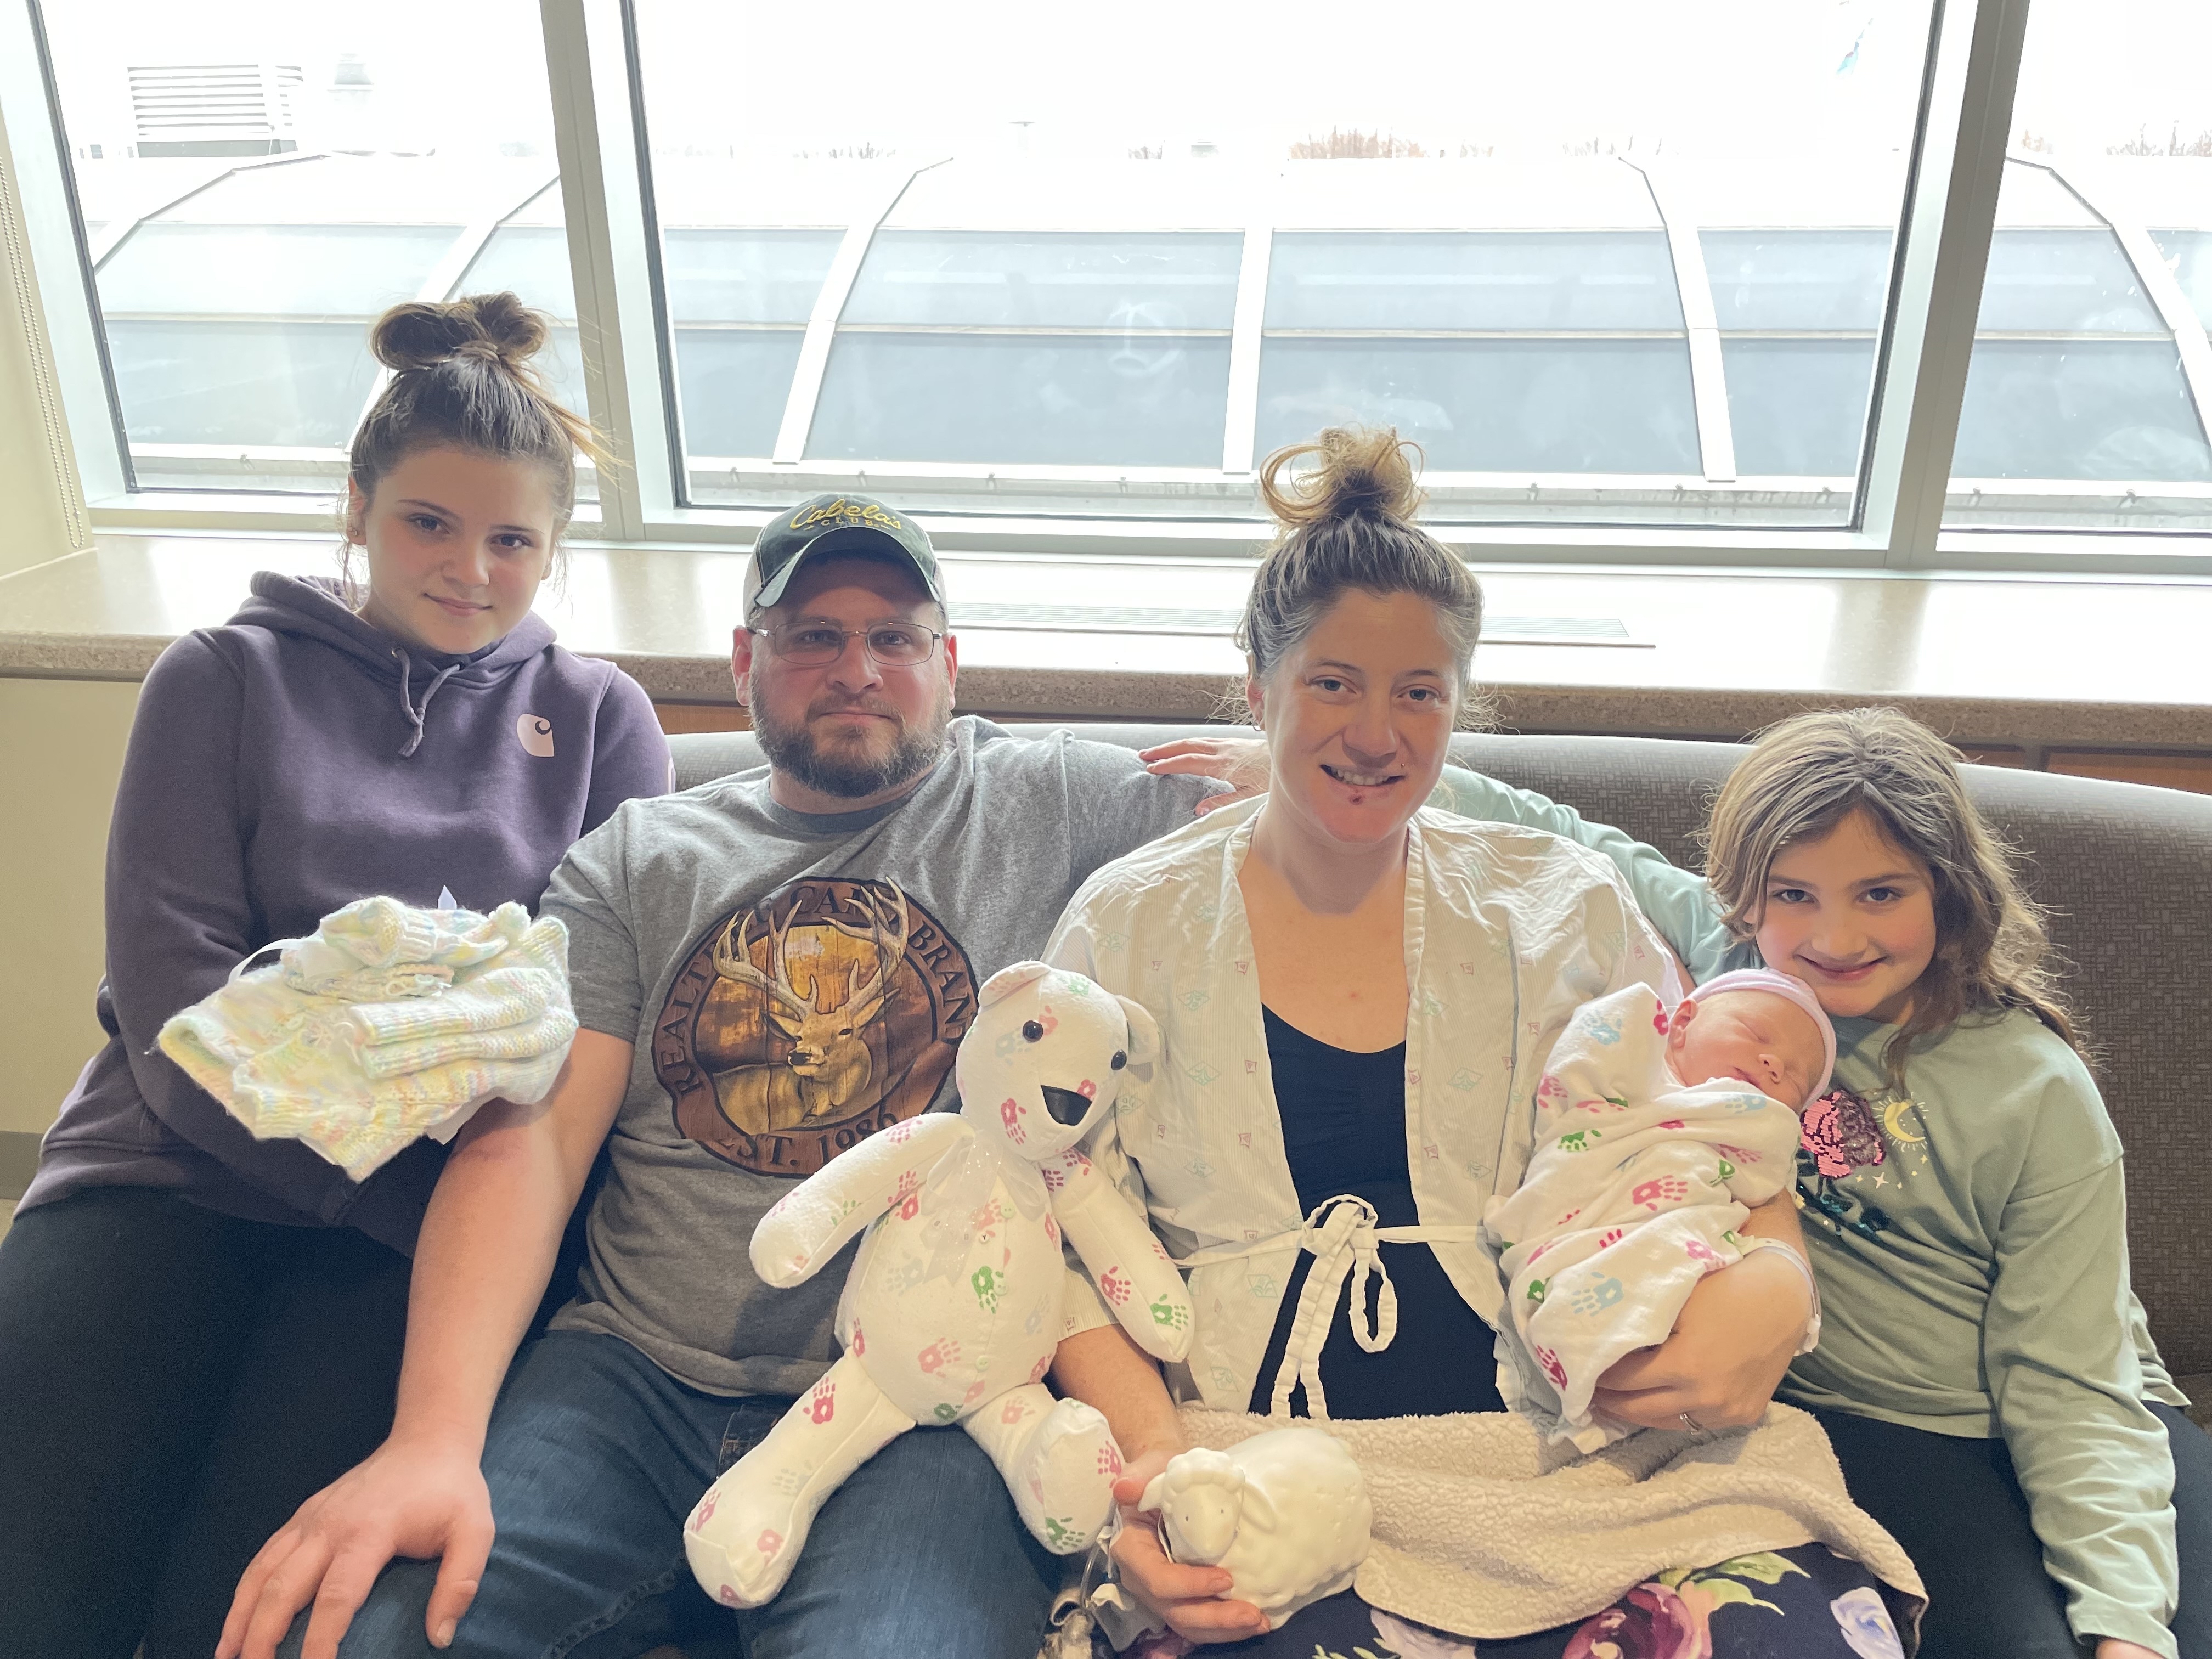 Meet some of the first Wisconsin babies born in 2022